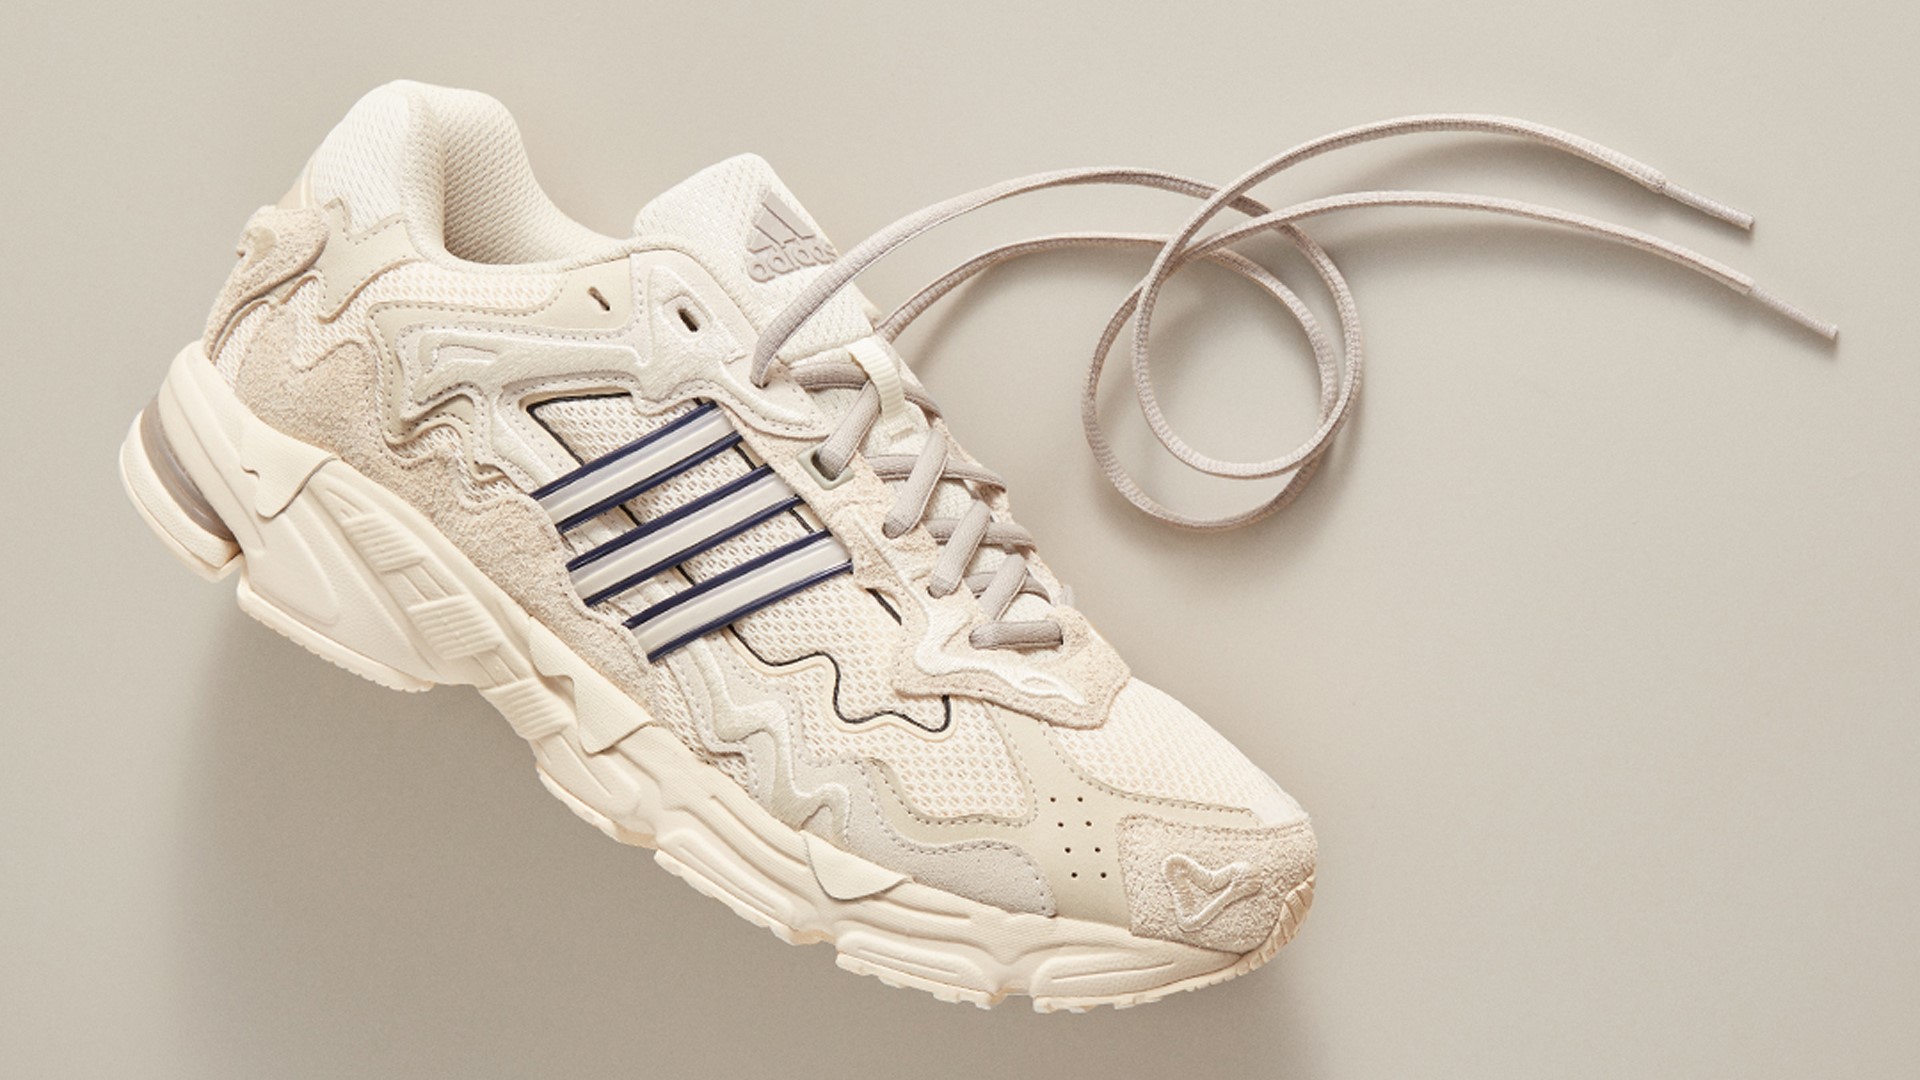 These Are Some Fresh Adidas Tear Away